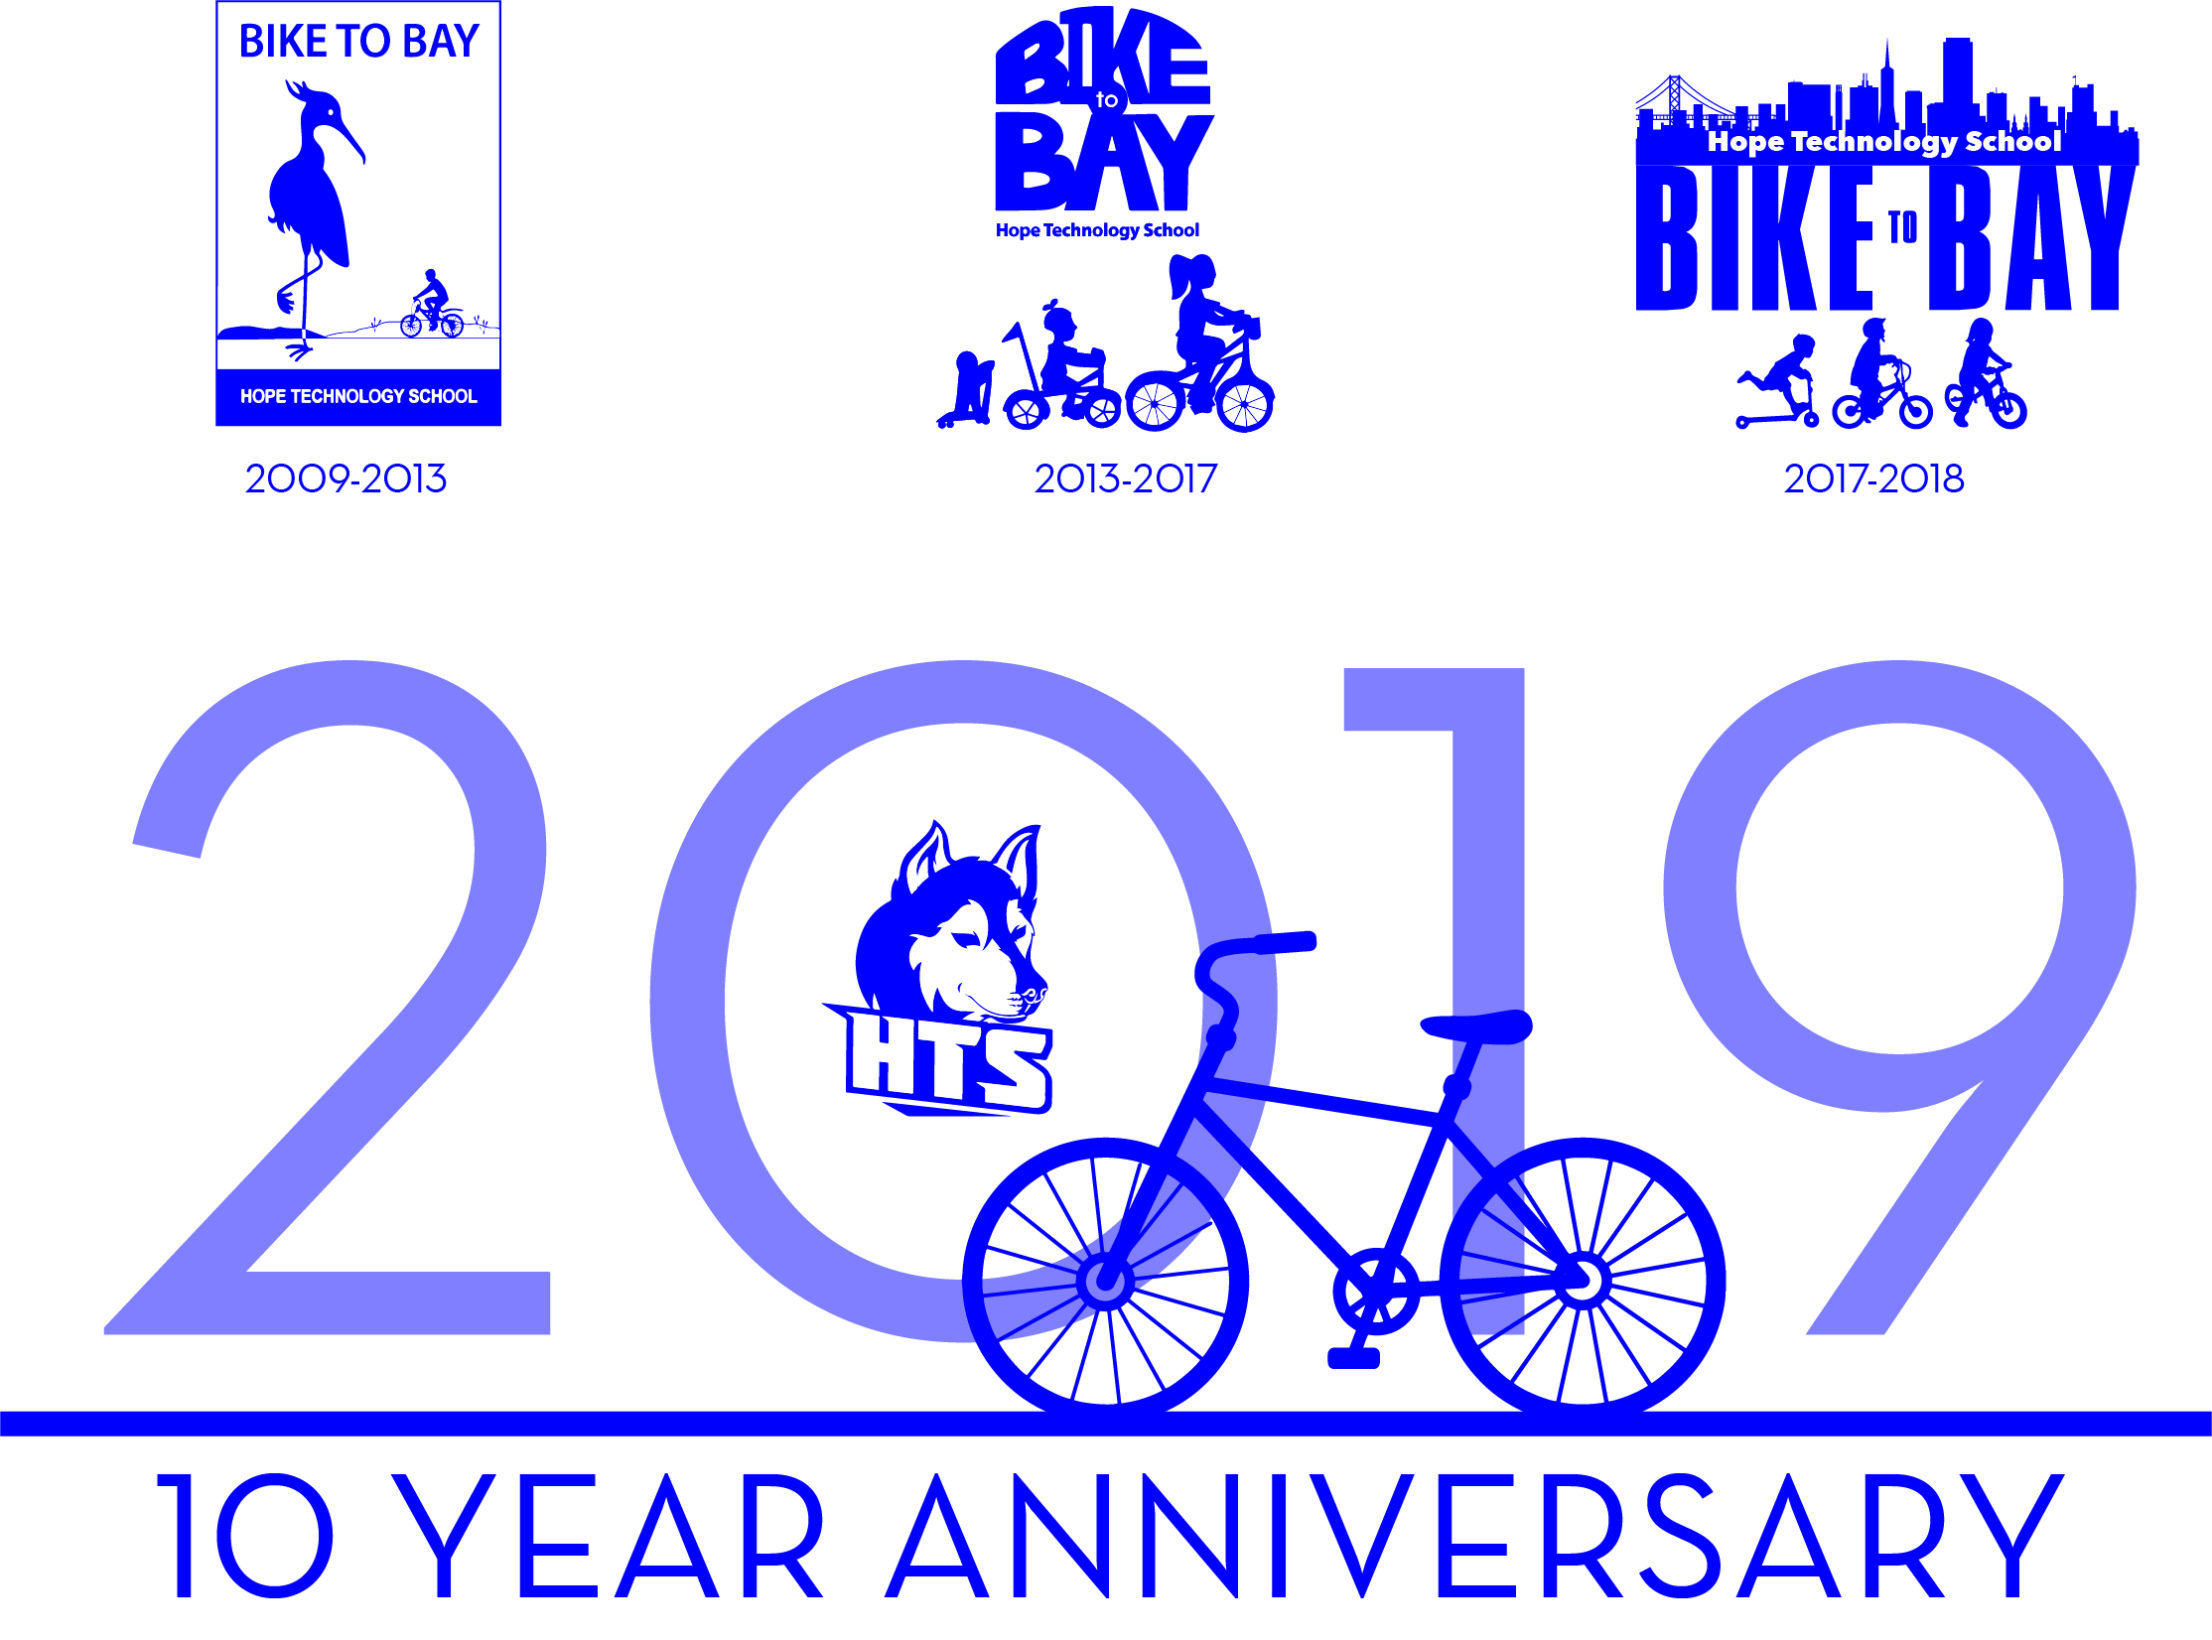 Bike to Bay 2019 is Coming! Hope Technology School